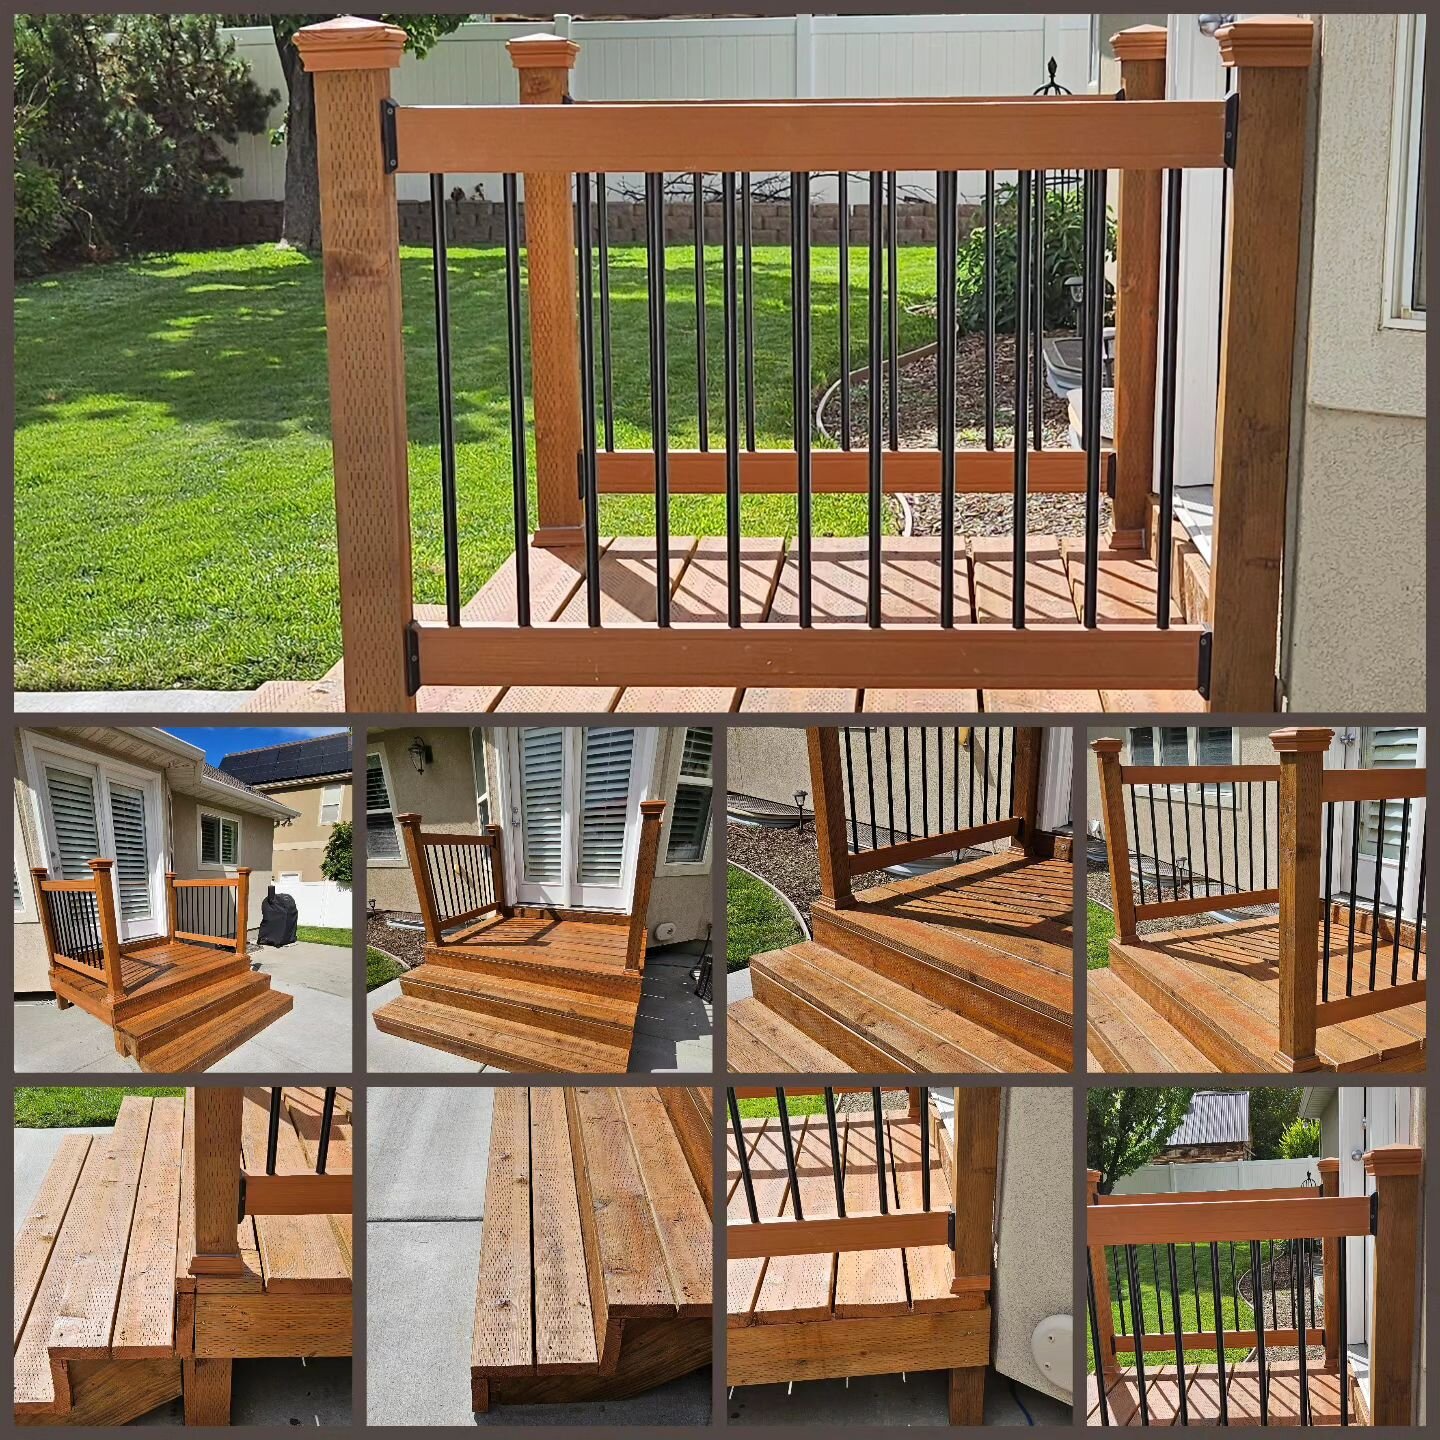 This was a recent deck built by Your Handyman Pros.  Let us know if you need a deck, stairs, or railing built for you.  801 949 2376